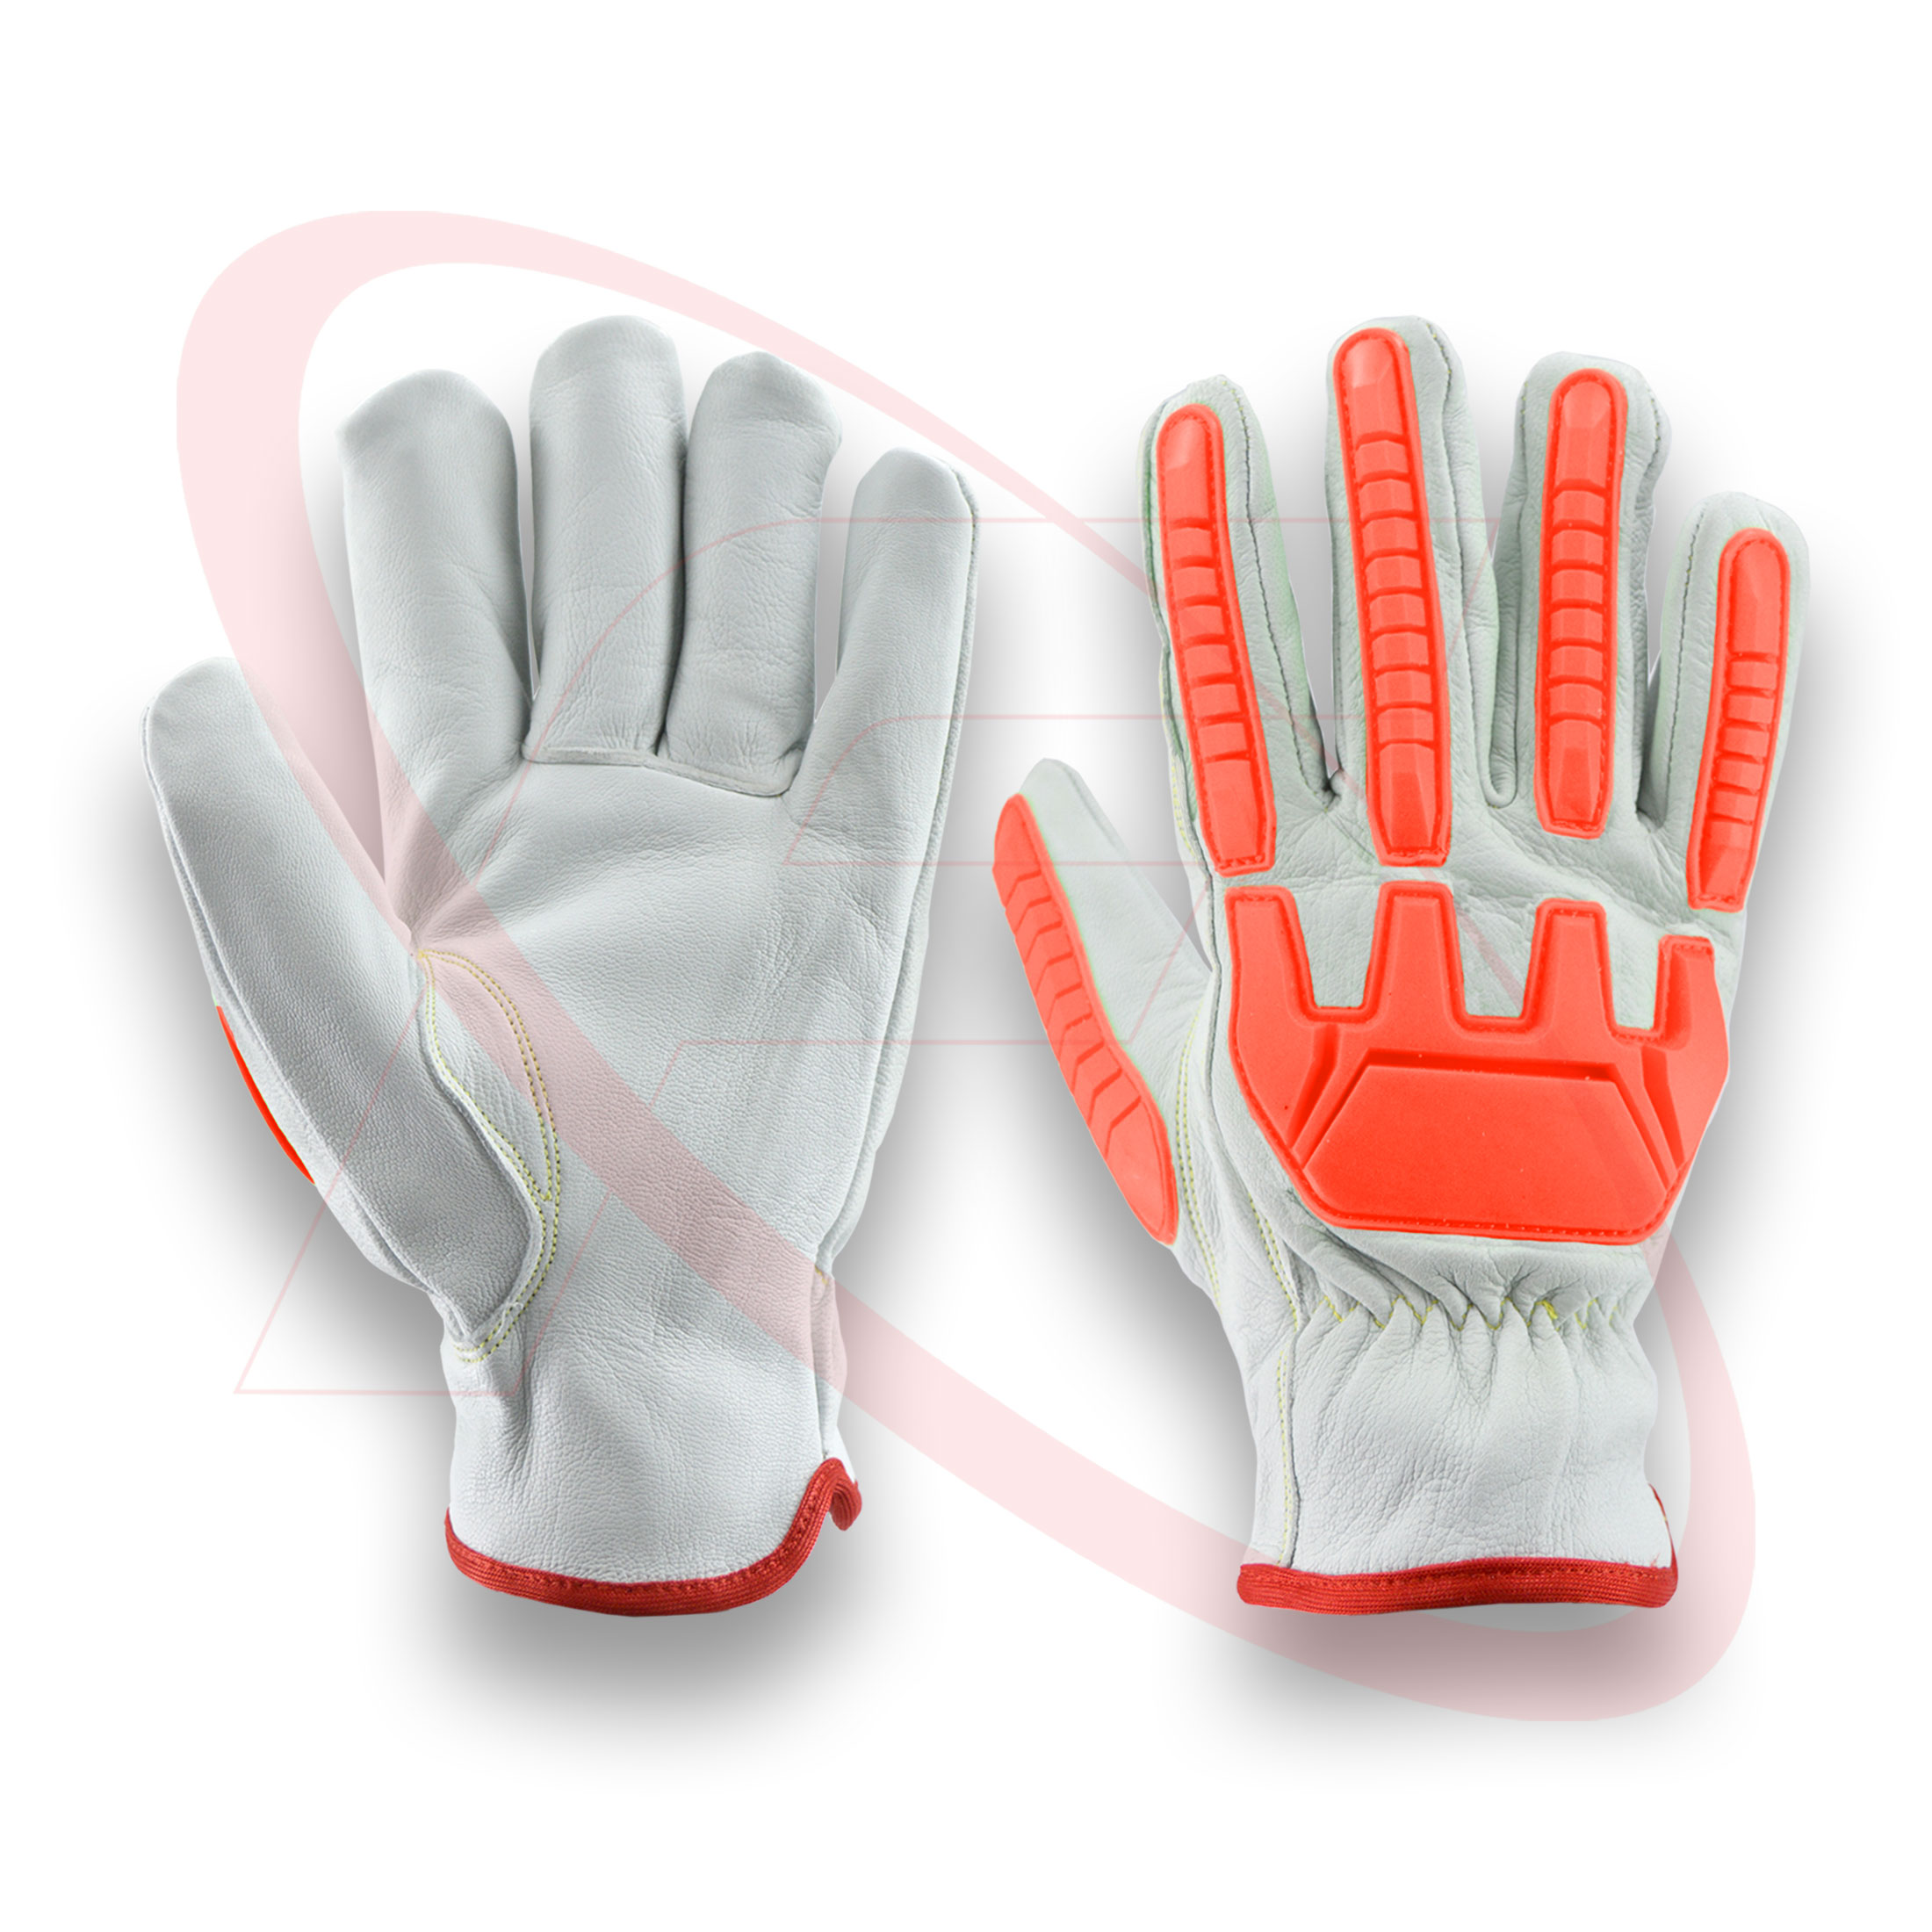 Impact Protective Gloves Cut Resistant Anti-Impact Gloves Goatskin Leather Driver Gloves